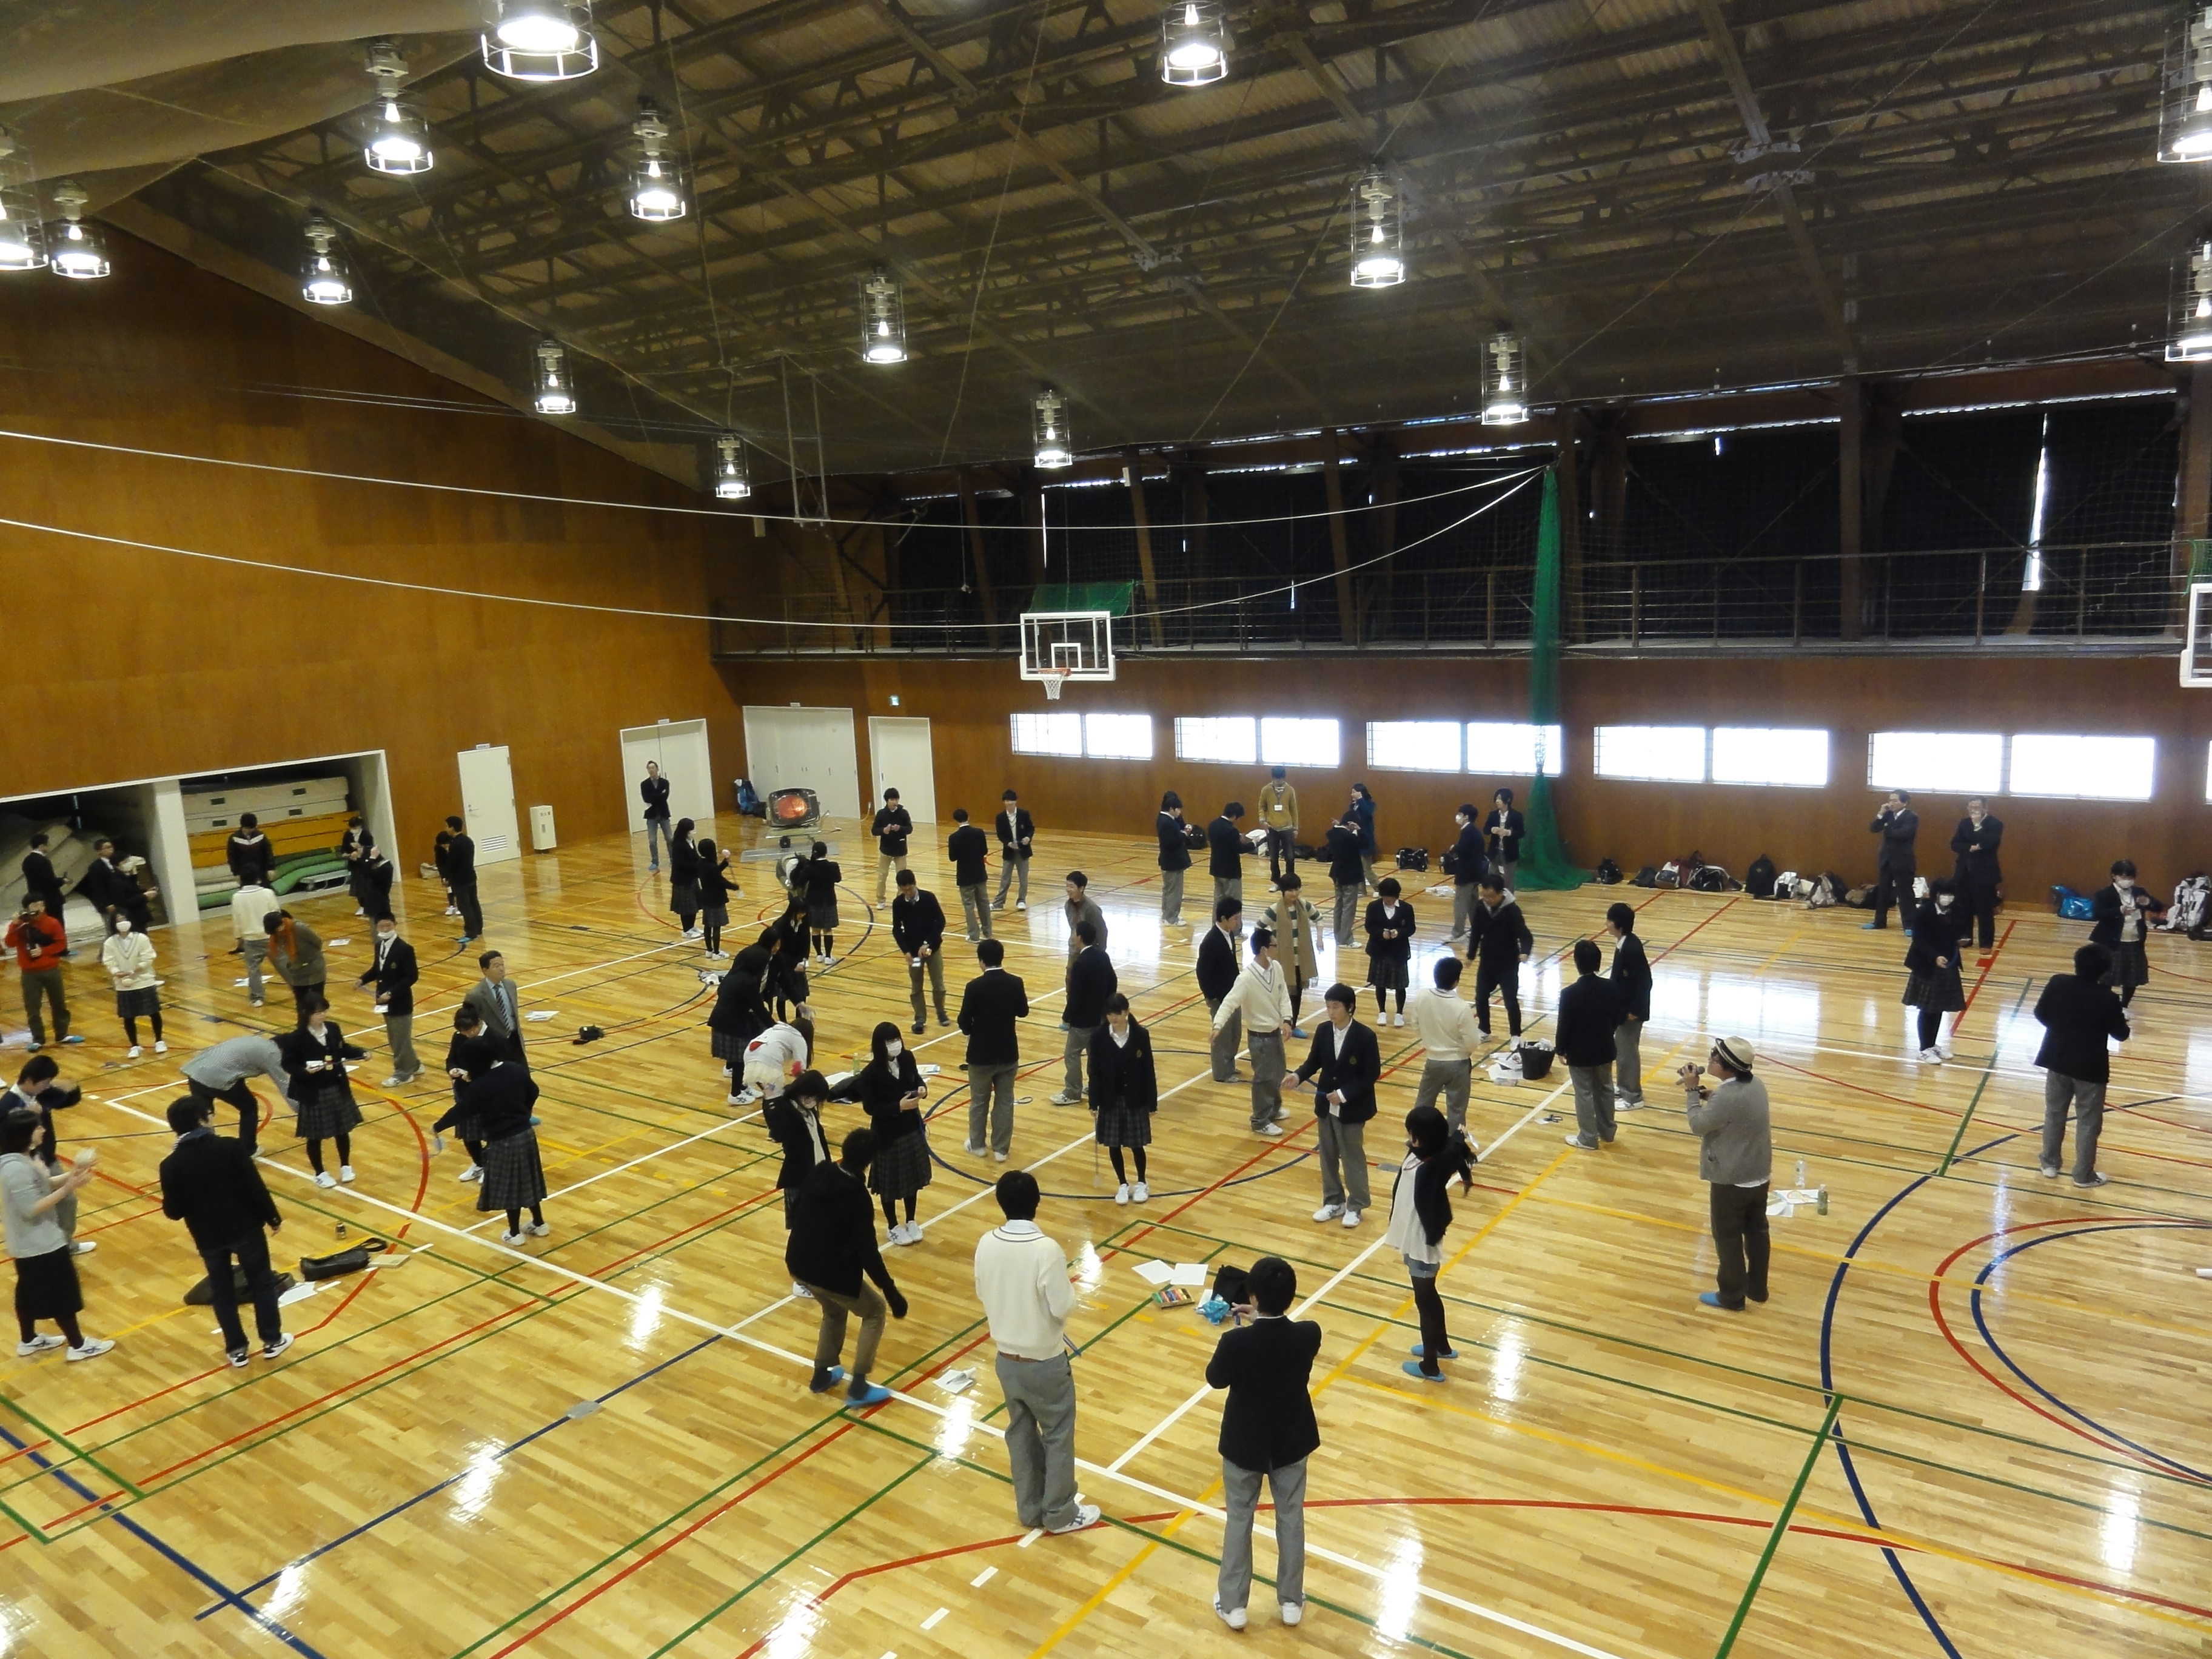 Project for students in the northern part of Kyoto Prefecture "Maruttoku"